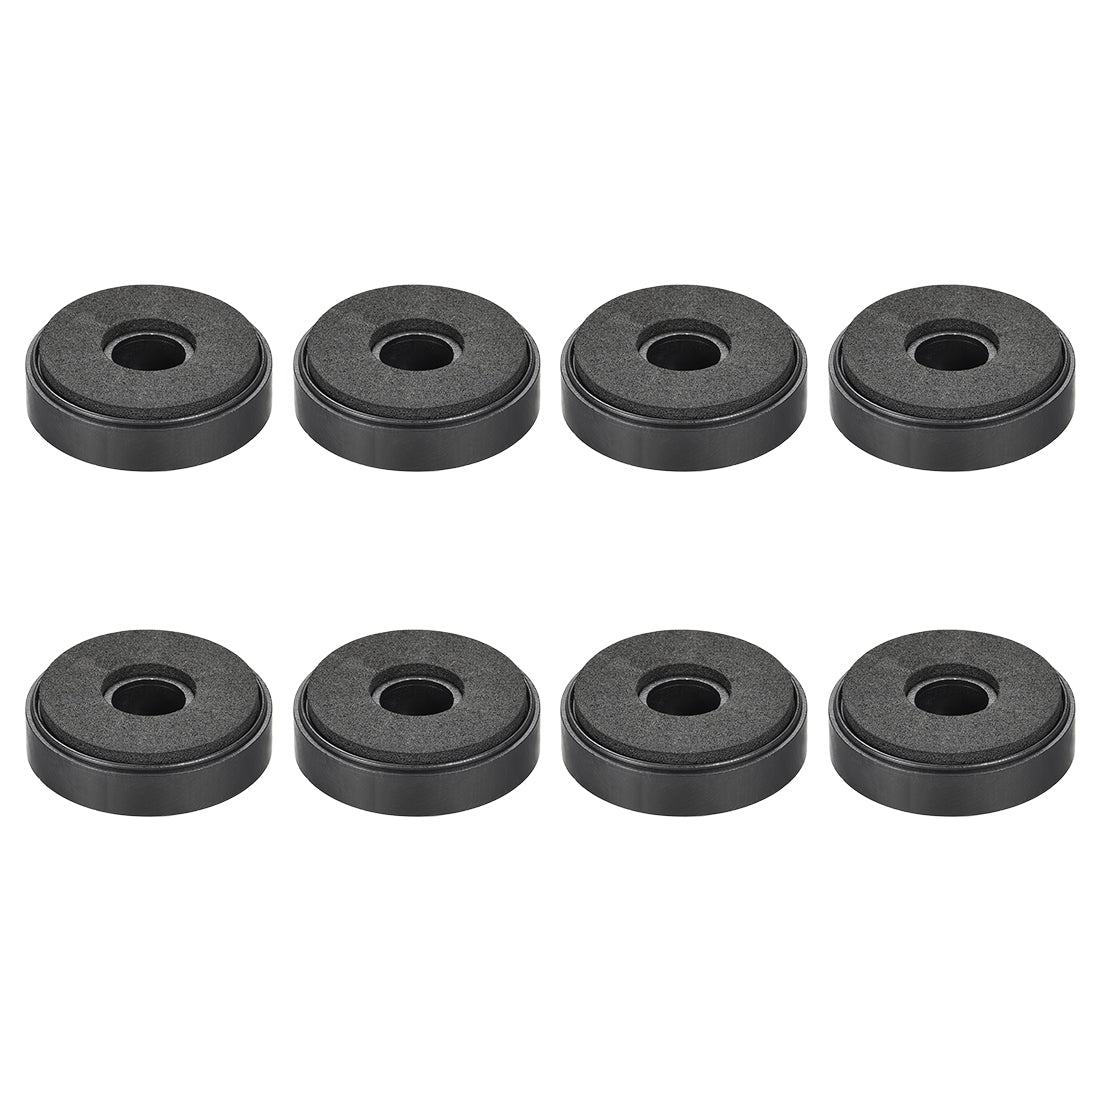 uxcell Uxcell 8 Pcs D40xH11.35mm Plastic Feet Anti-Vibration Base Pad Stand for Speaker Guitar Amplifier HiFi Black